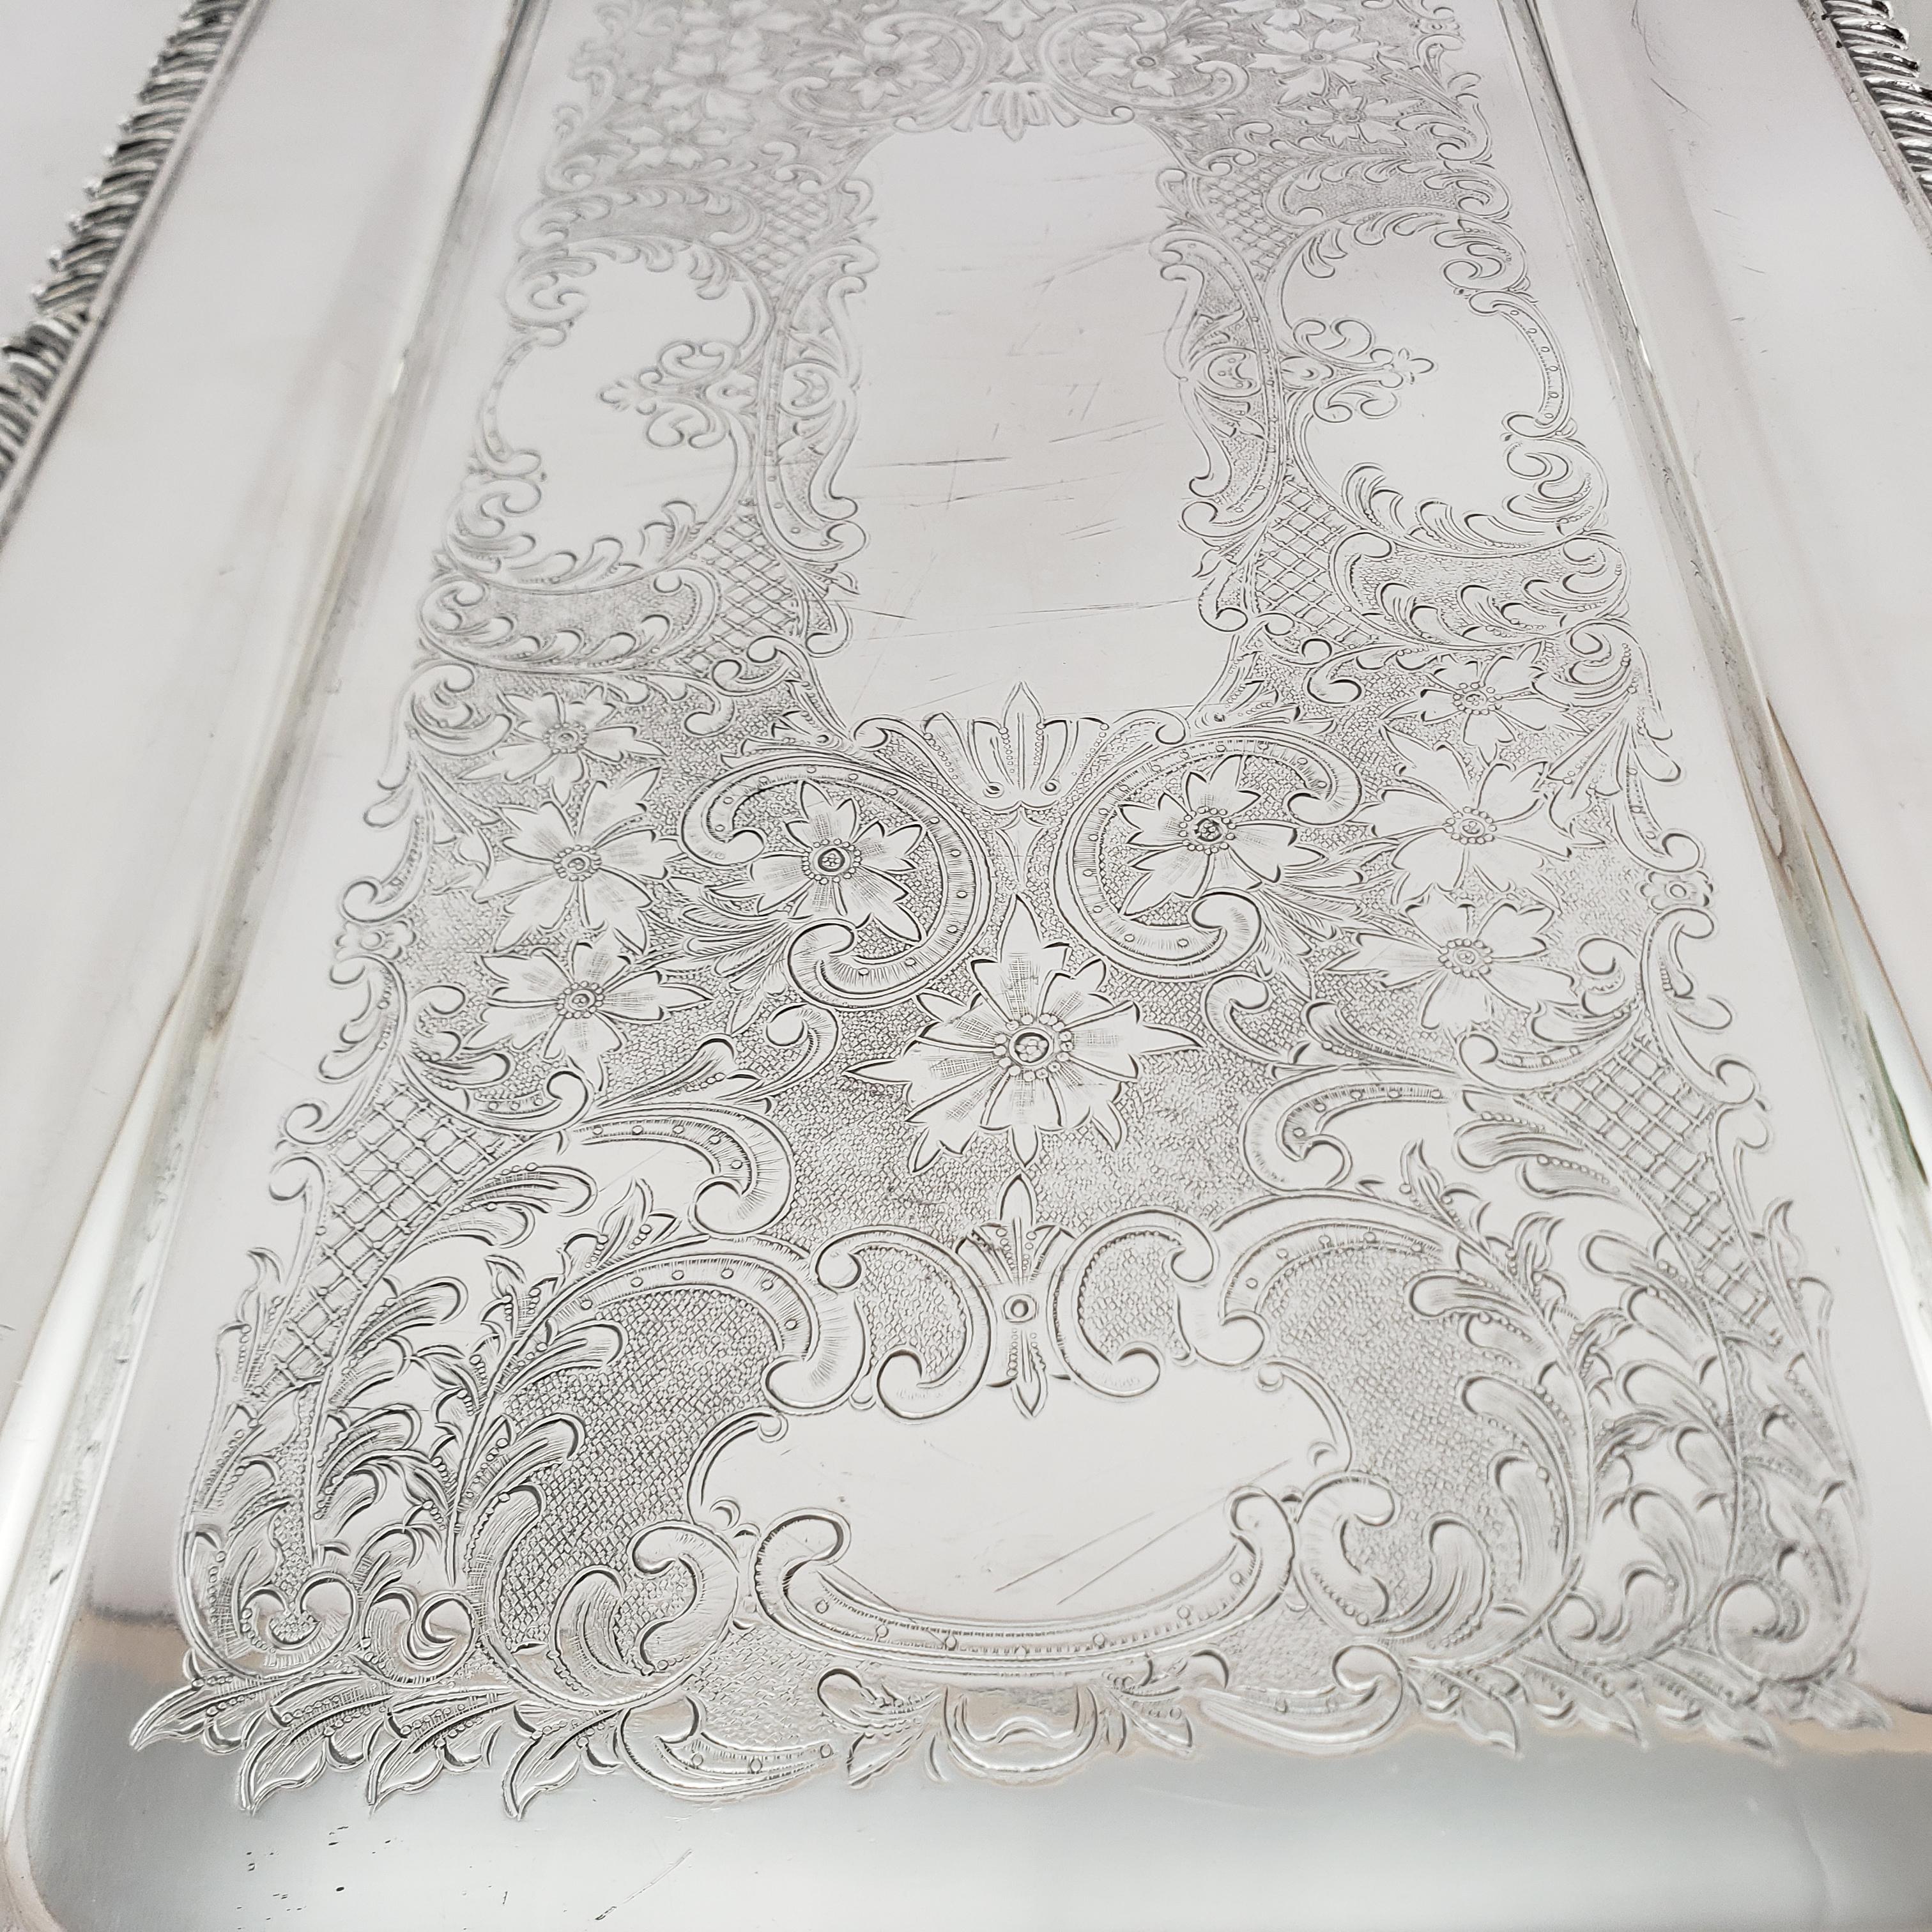 Antique Rectangular Silver Plated Serving Tray with Stylized Rope Decoration For Sale 3